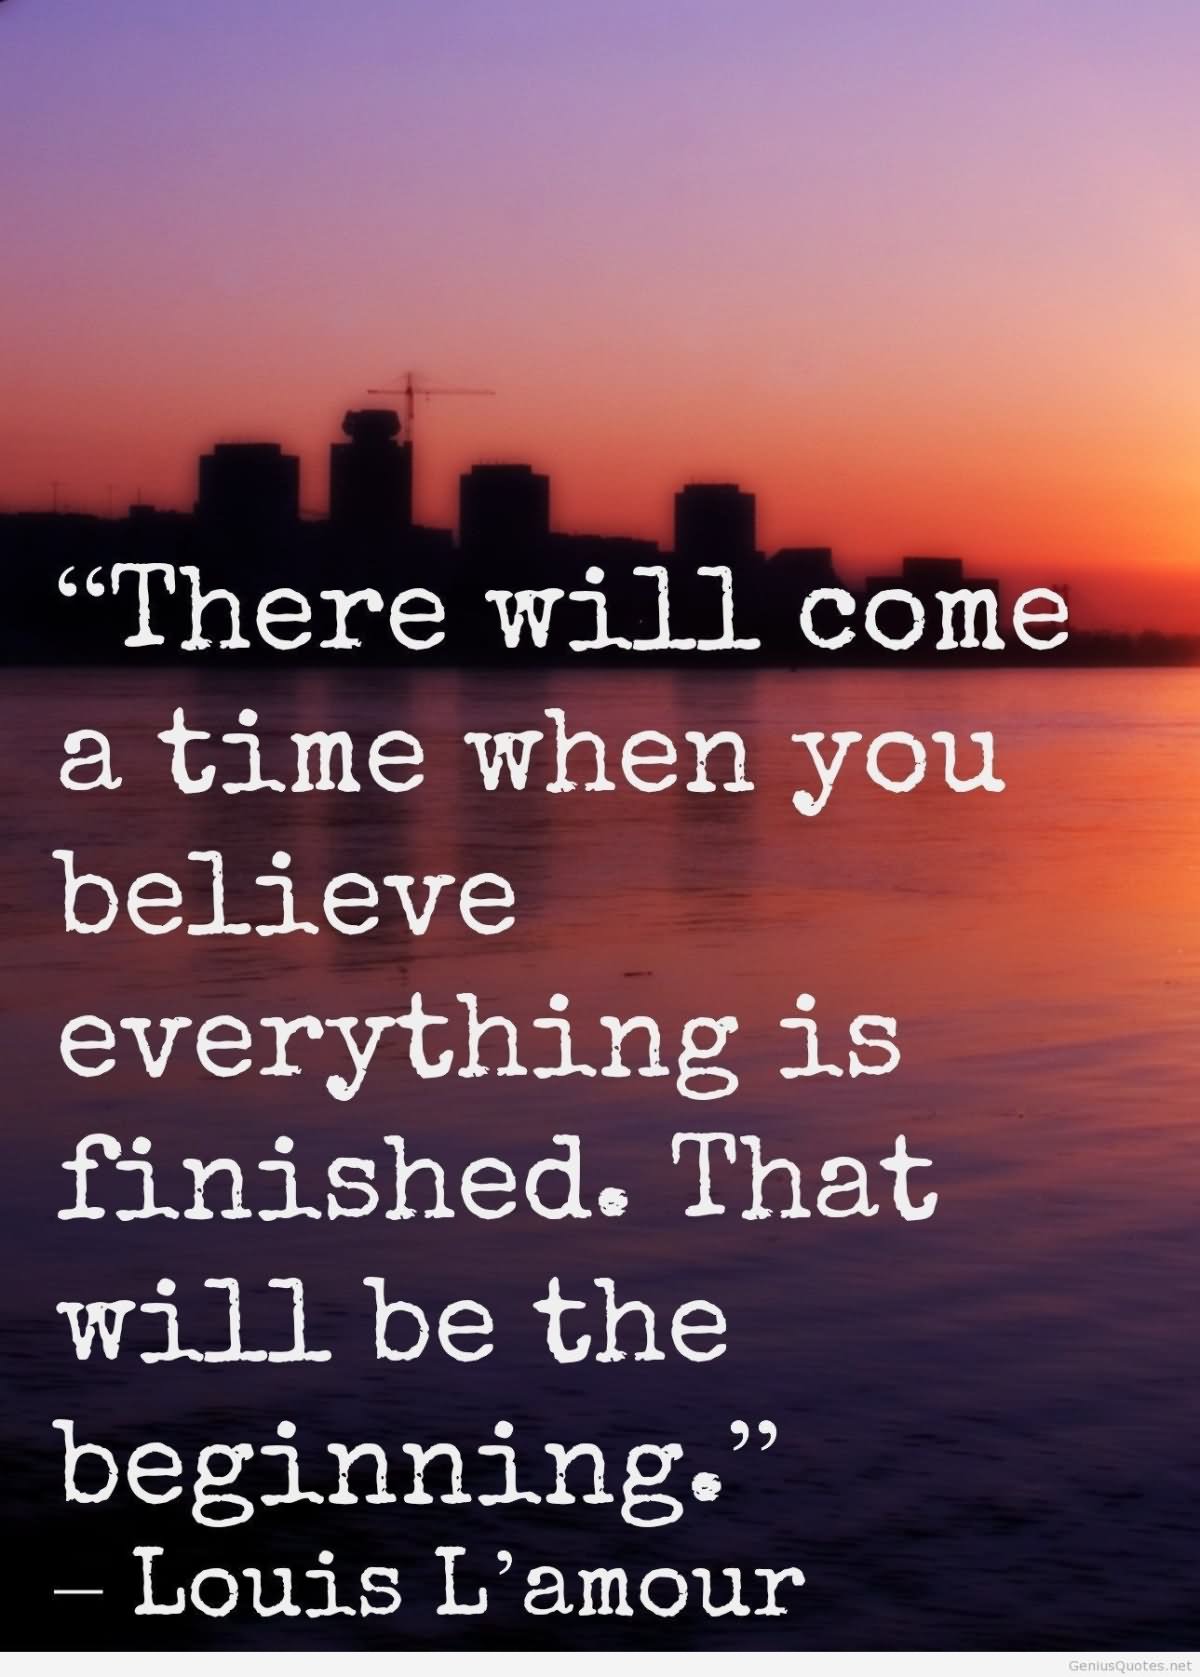 There will come a time when you believe everything is finished; that will be the beginning.  -  Louis L'amour